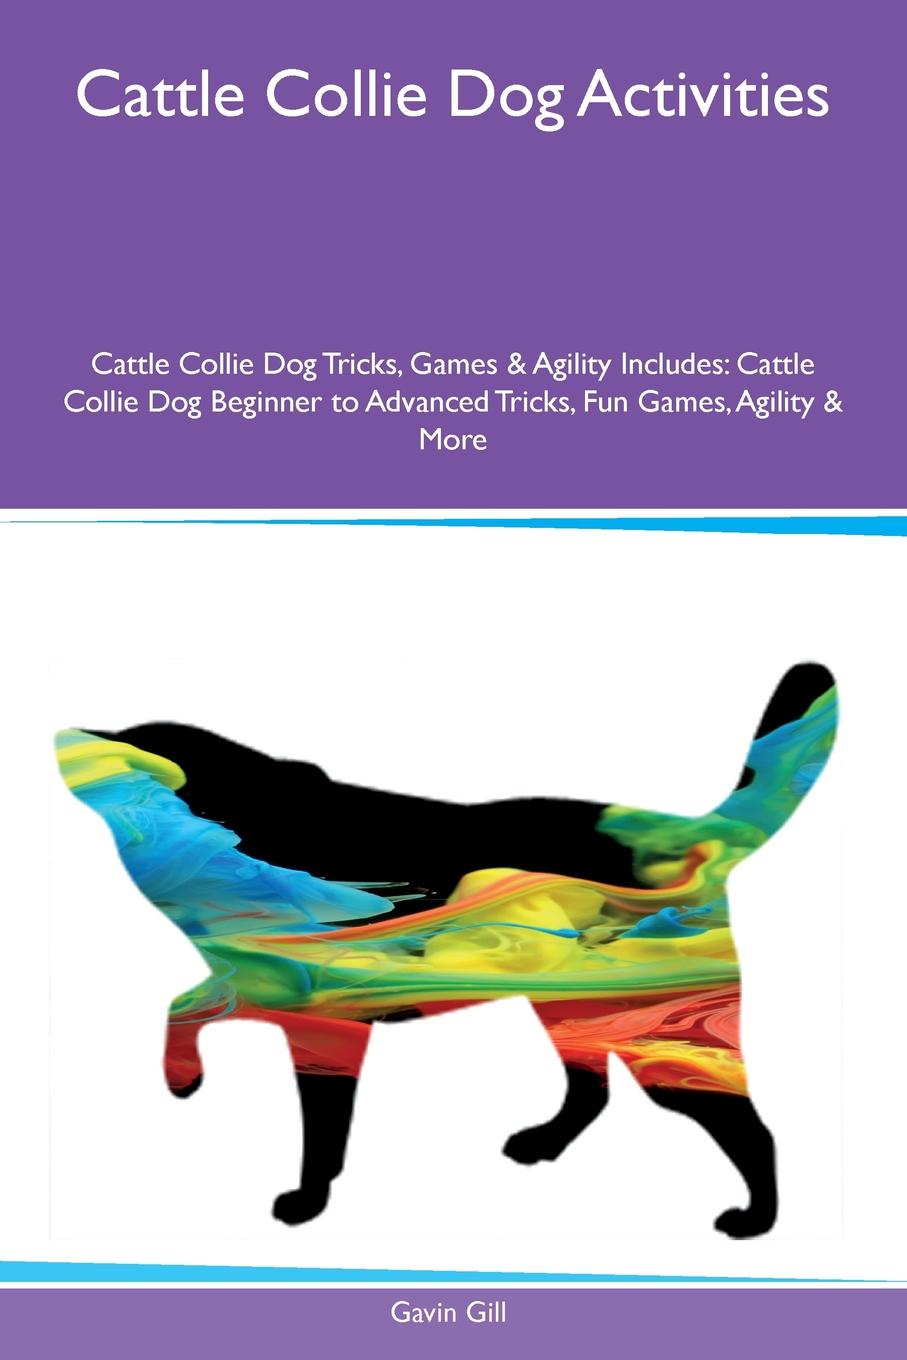 Cattle Collie Dog Activities Cattle Collie Dog Tricks, Games & Agility Includes. Cattle Collie Dog Beginner to Advanced Tricks, Fun Games, Agility & More